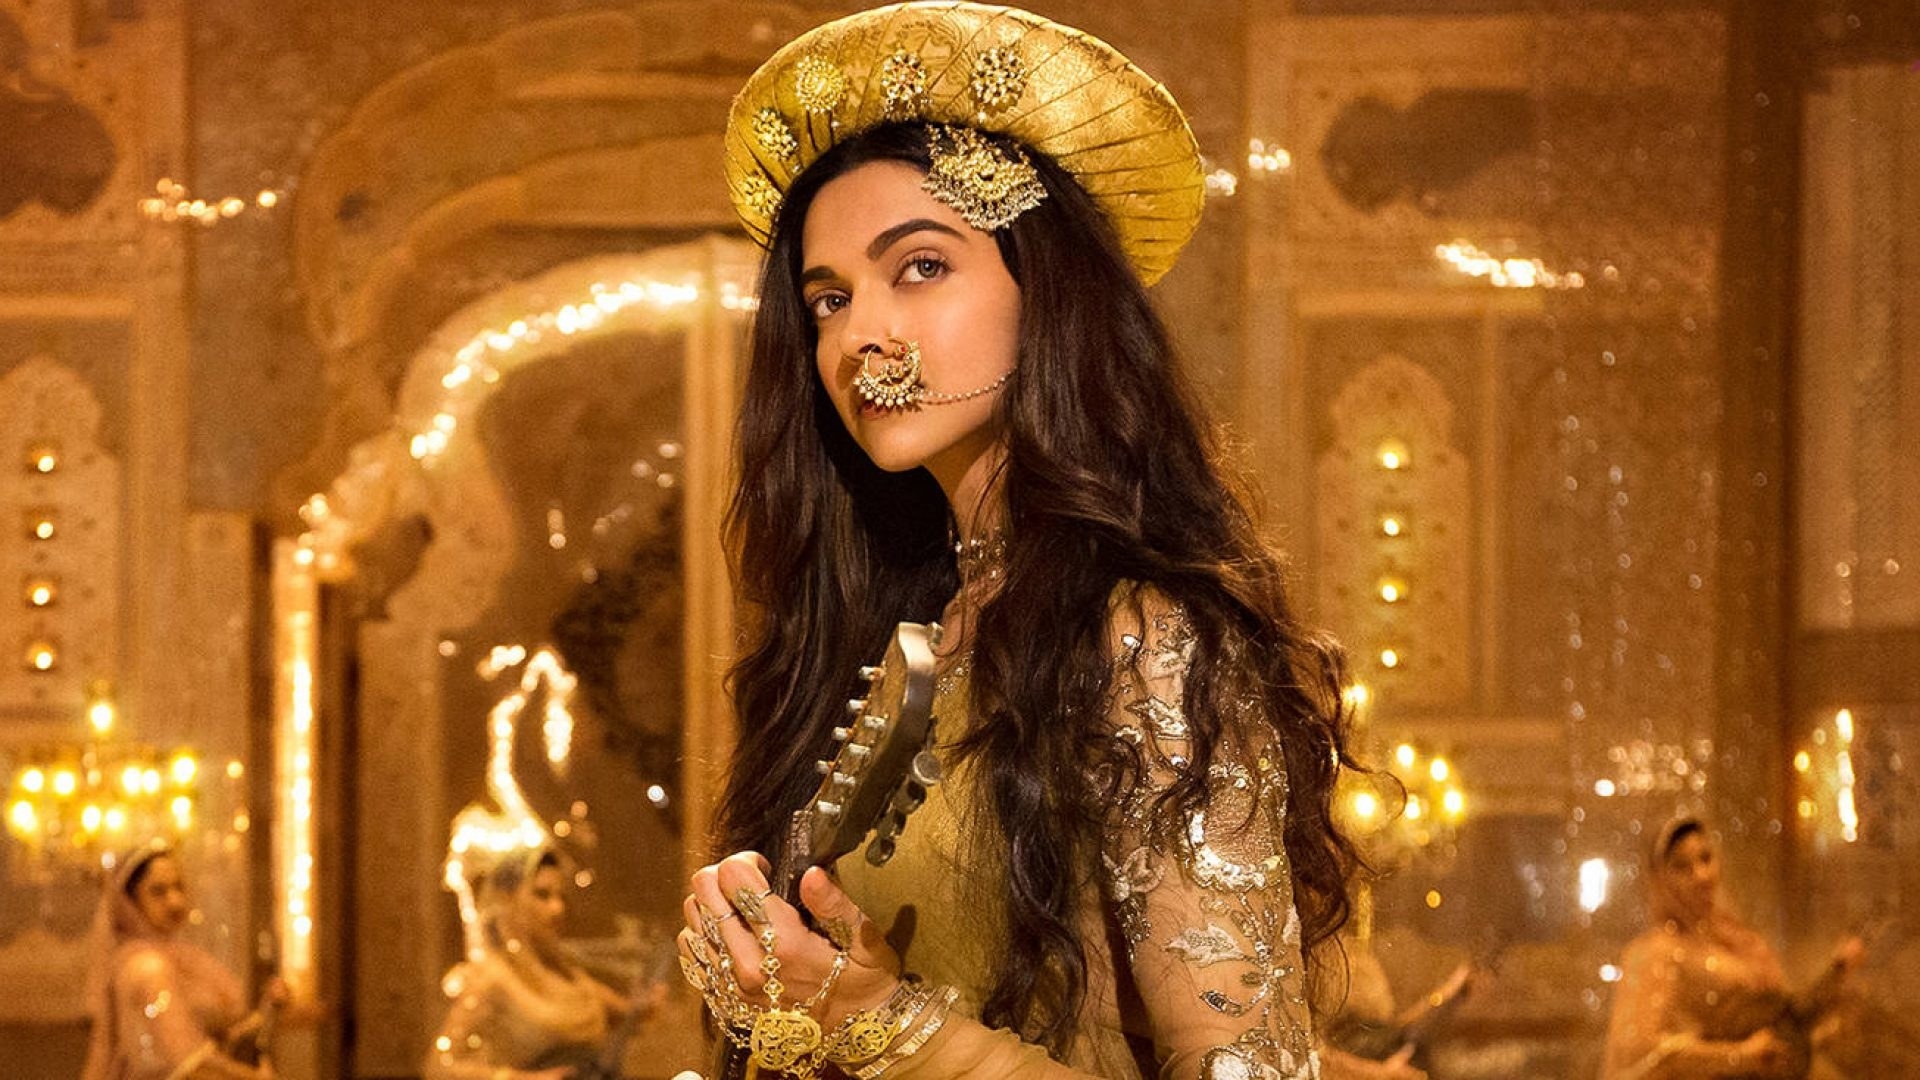 Deepika Padukone dressed in a Golden Lehenga and a turban with a nose ring, as her character Mastani for the movie Bajirao Mastani.